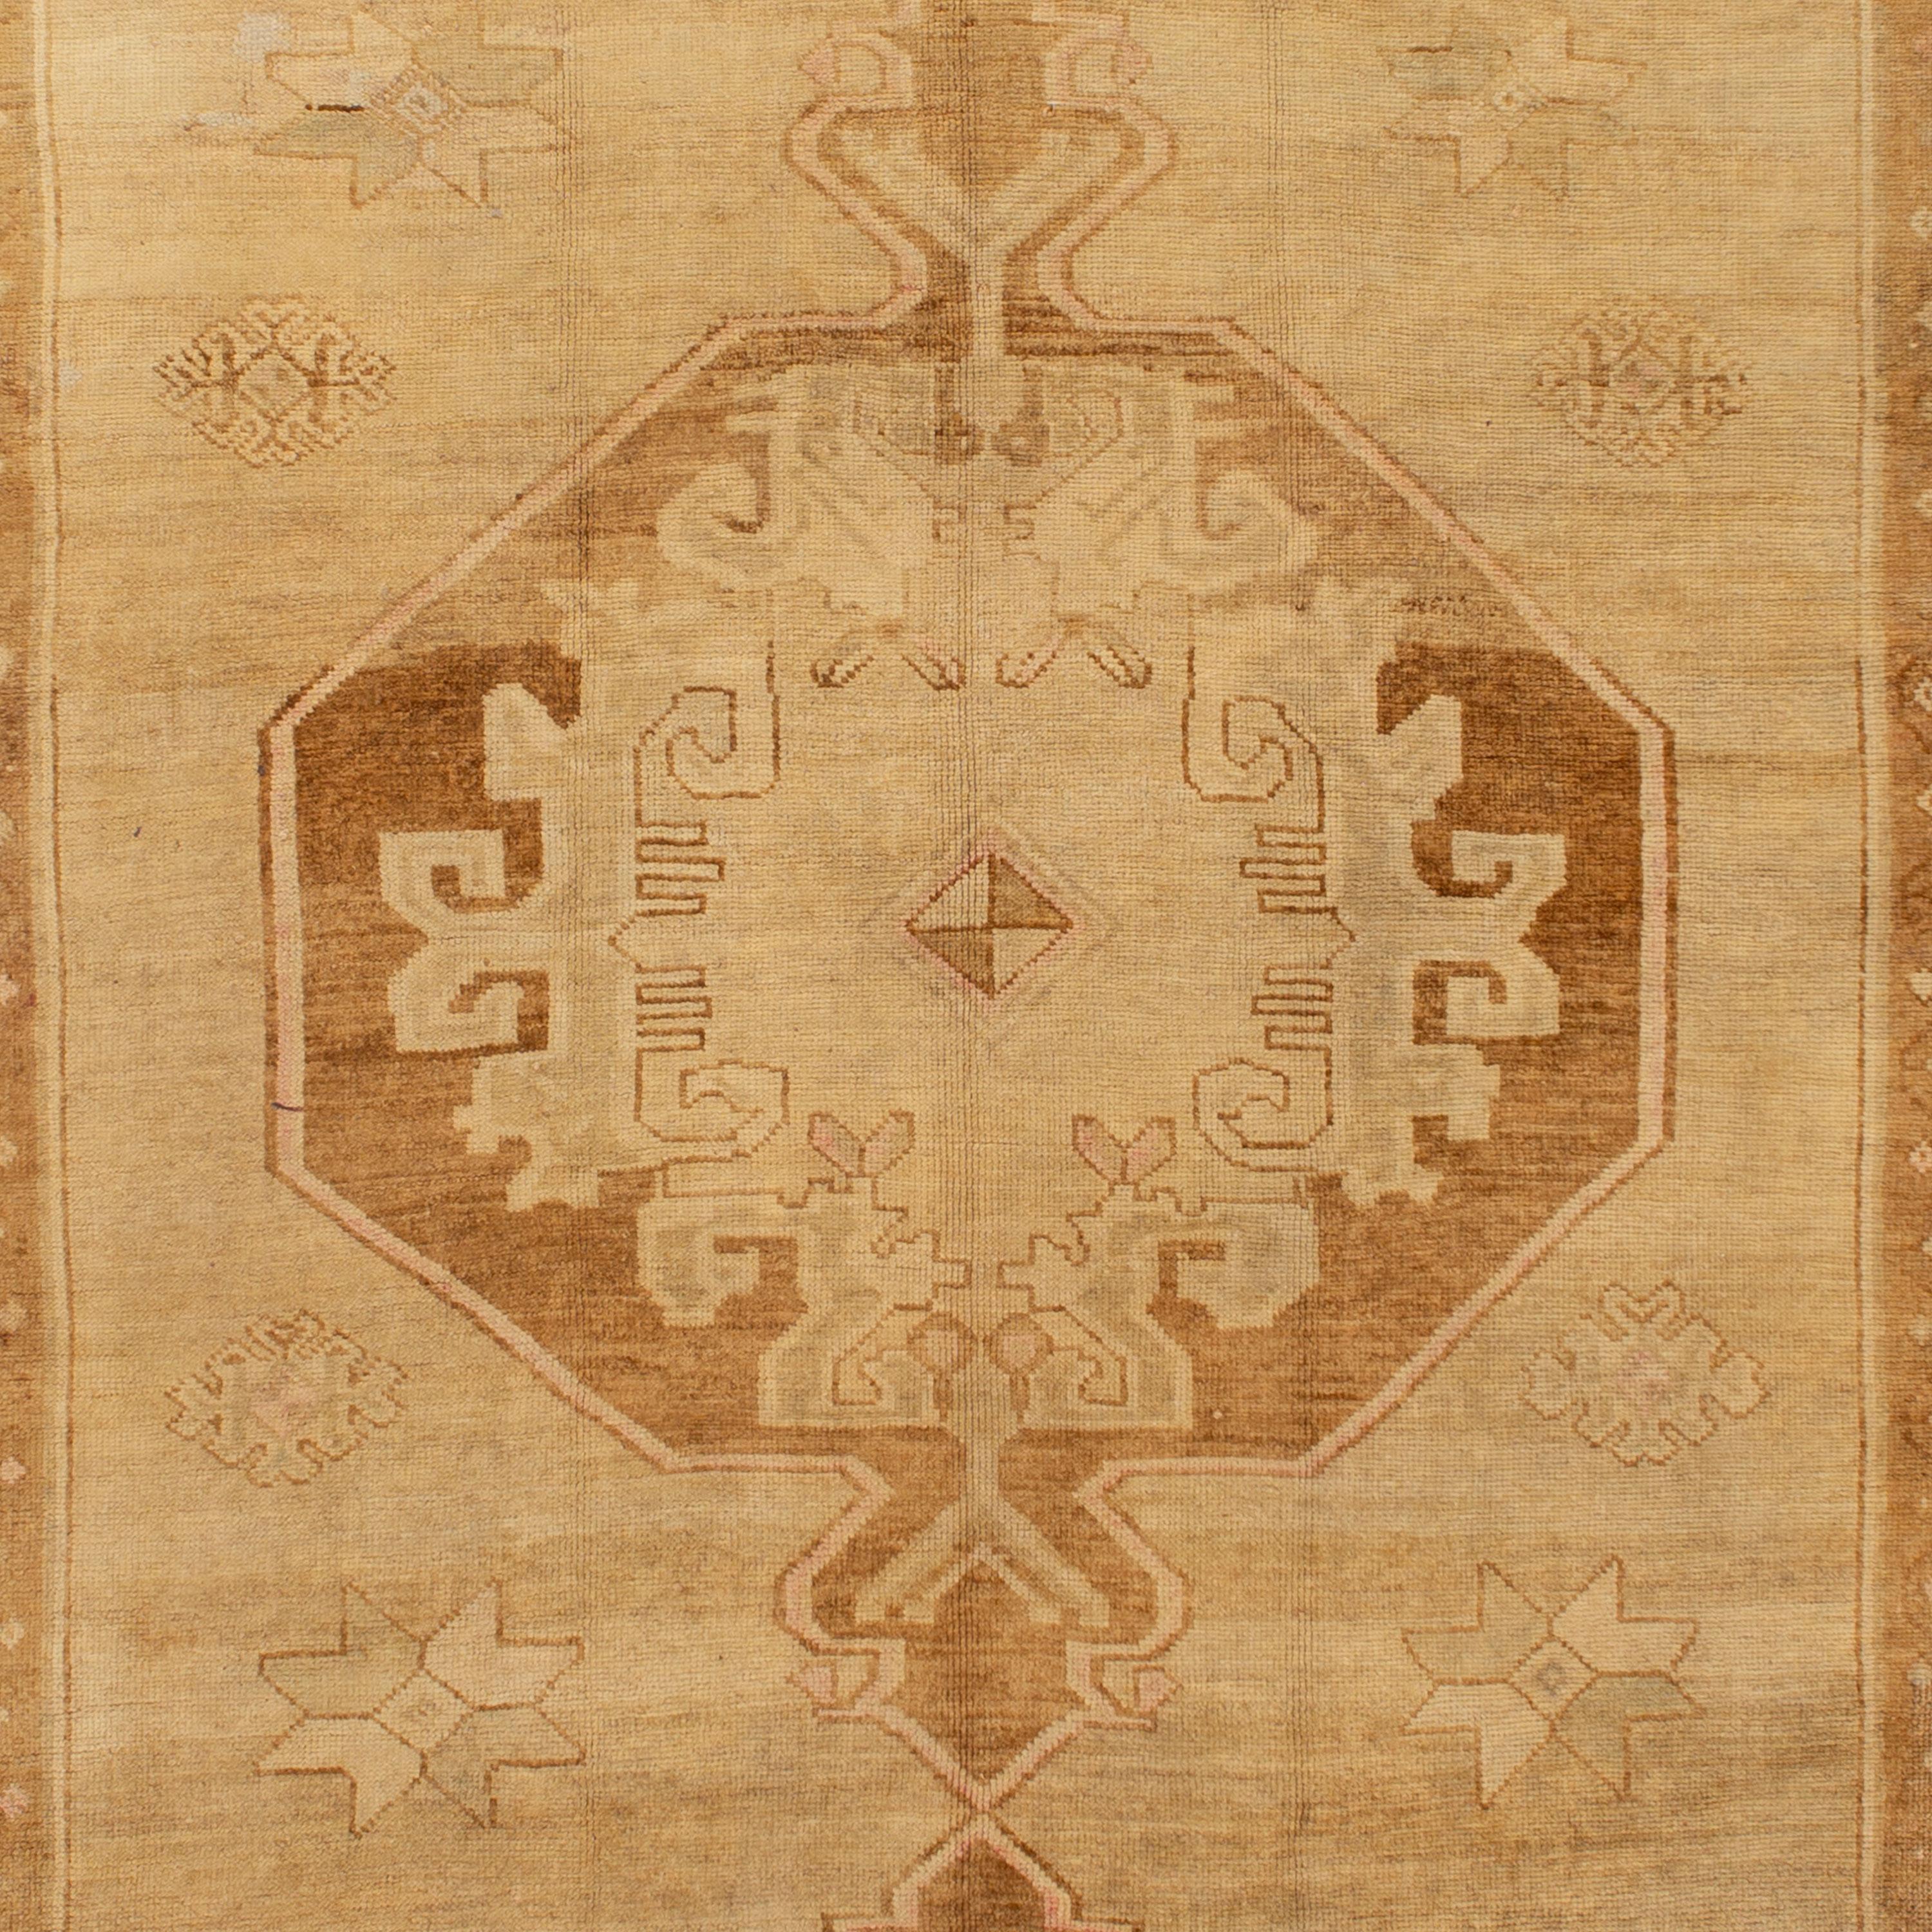 This vintage Turkish rug, circa the 1950s, was reduced to a low-contrast field through cycles of sun-fading and washing - achieving a natural undyed palette and venting the true form of the Kars rug by marrying artisan technique and the natural